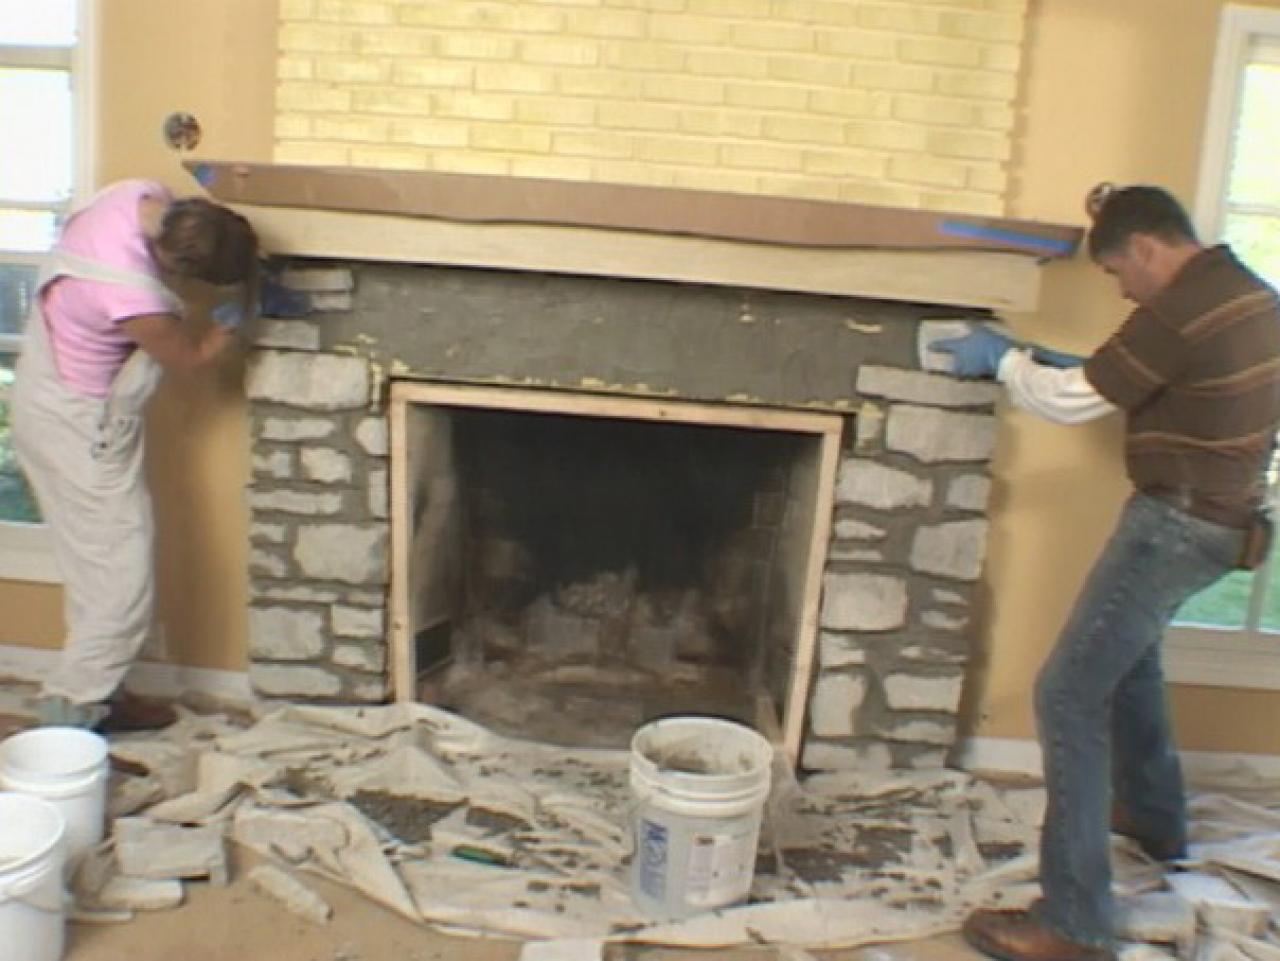 A Fireplace Mantel And Add Stone Veneer, How To Install Stone Around Gas Fireplace